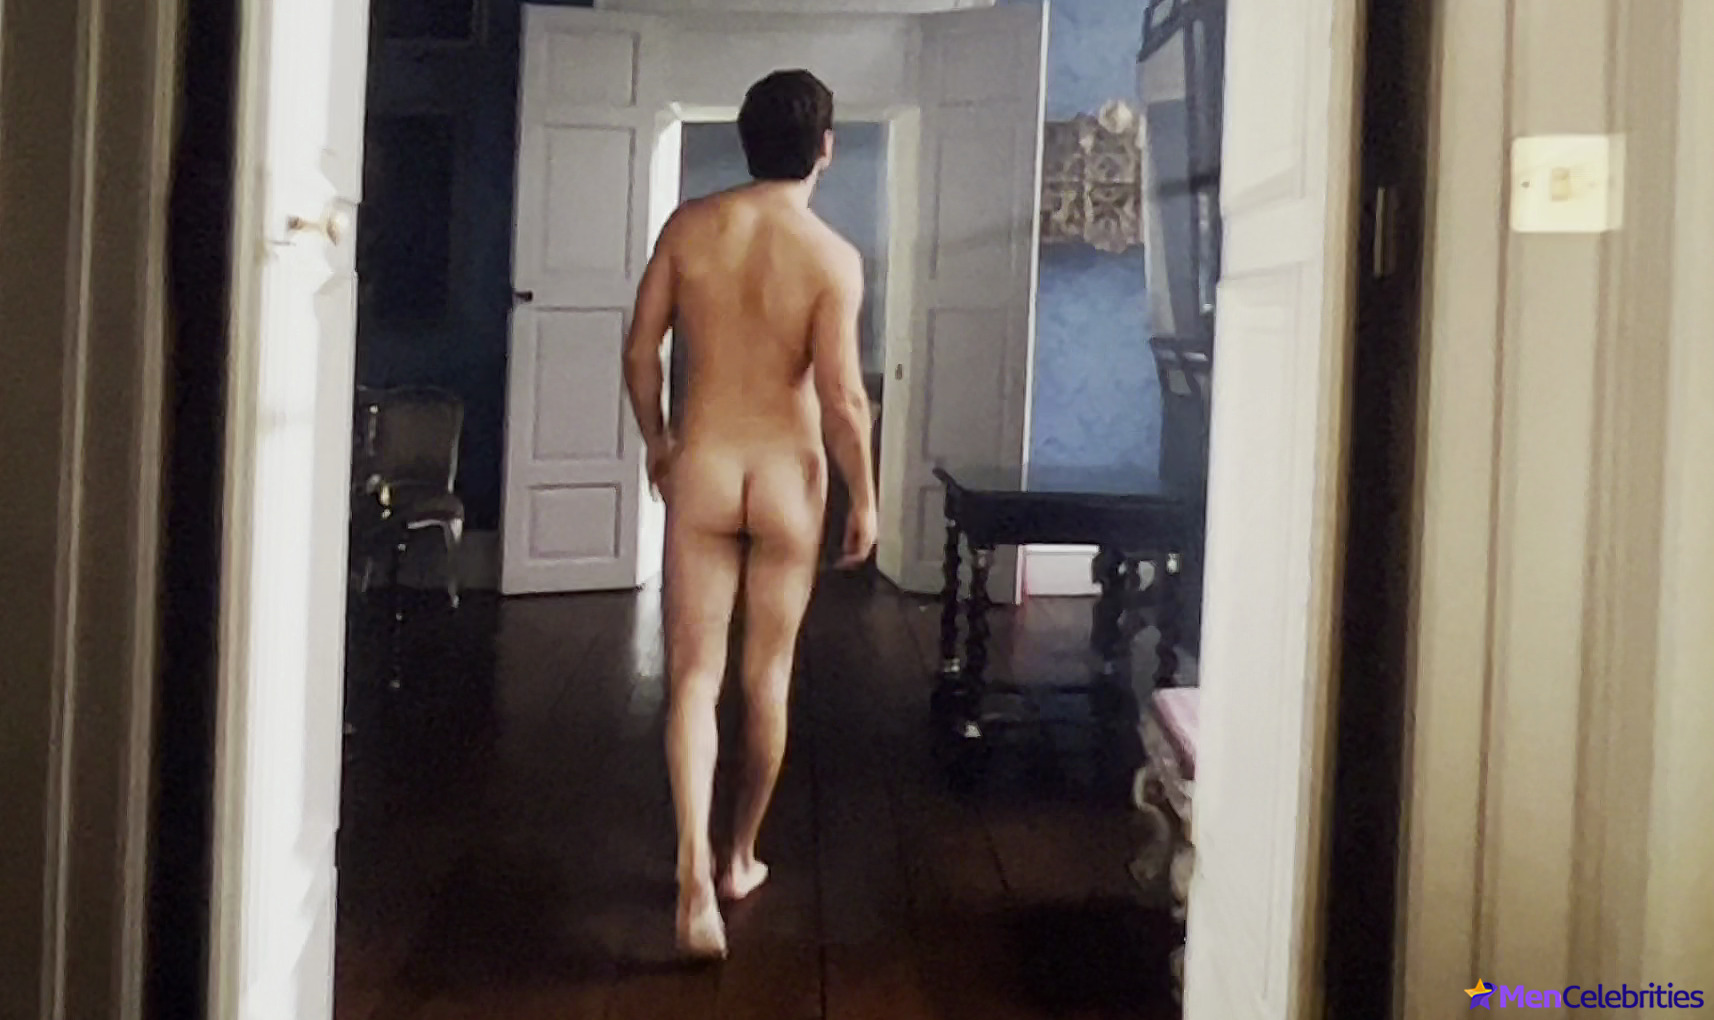 ‘Saltburn’ Director Discusses Barry Keoghan’s Full-Frontal Nude Scene